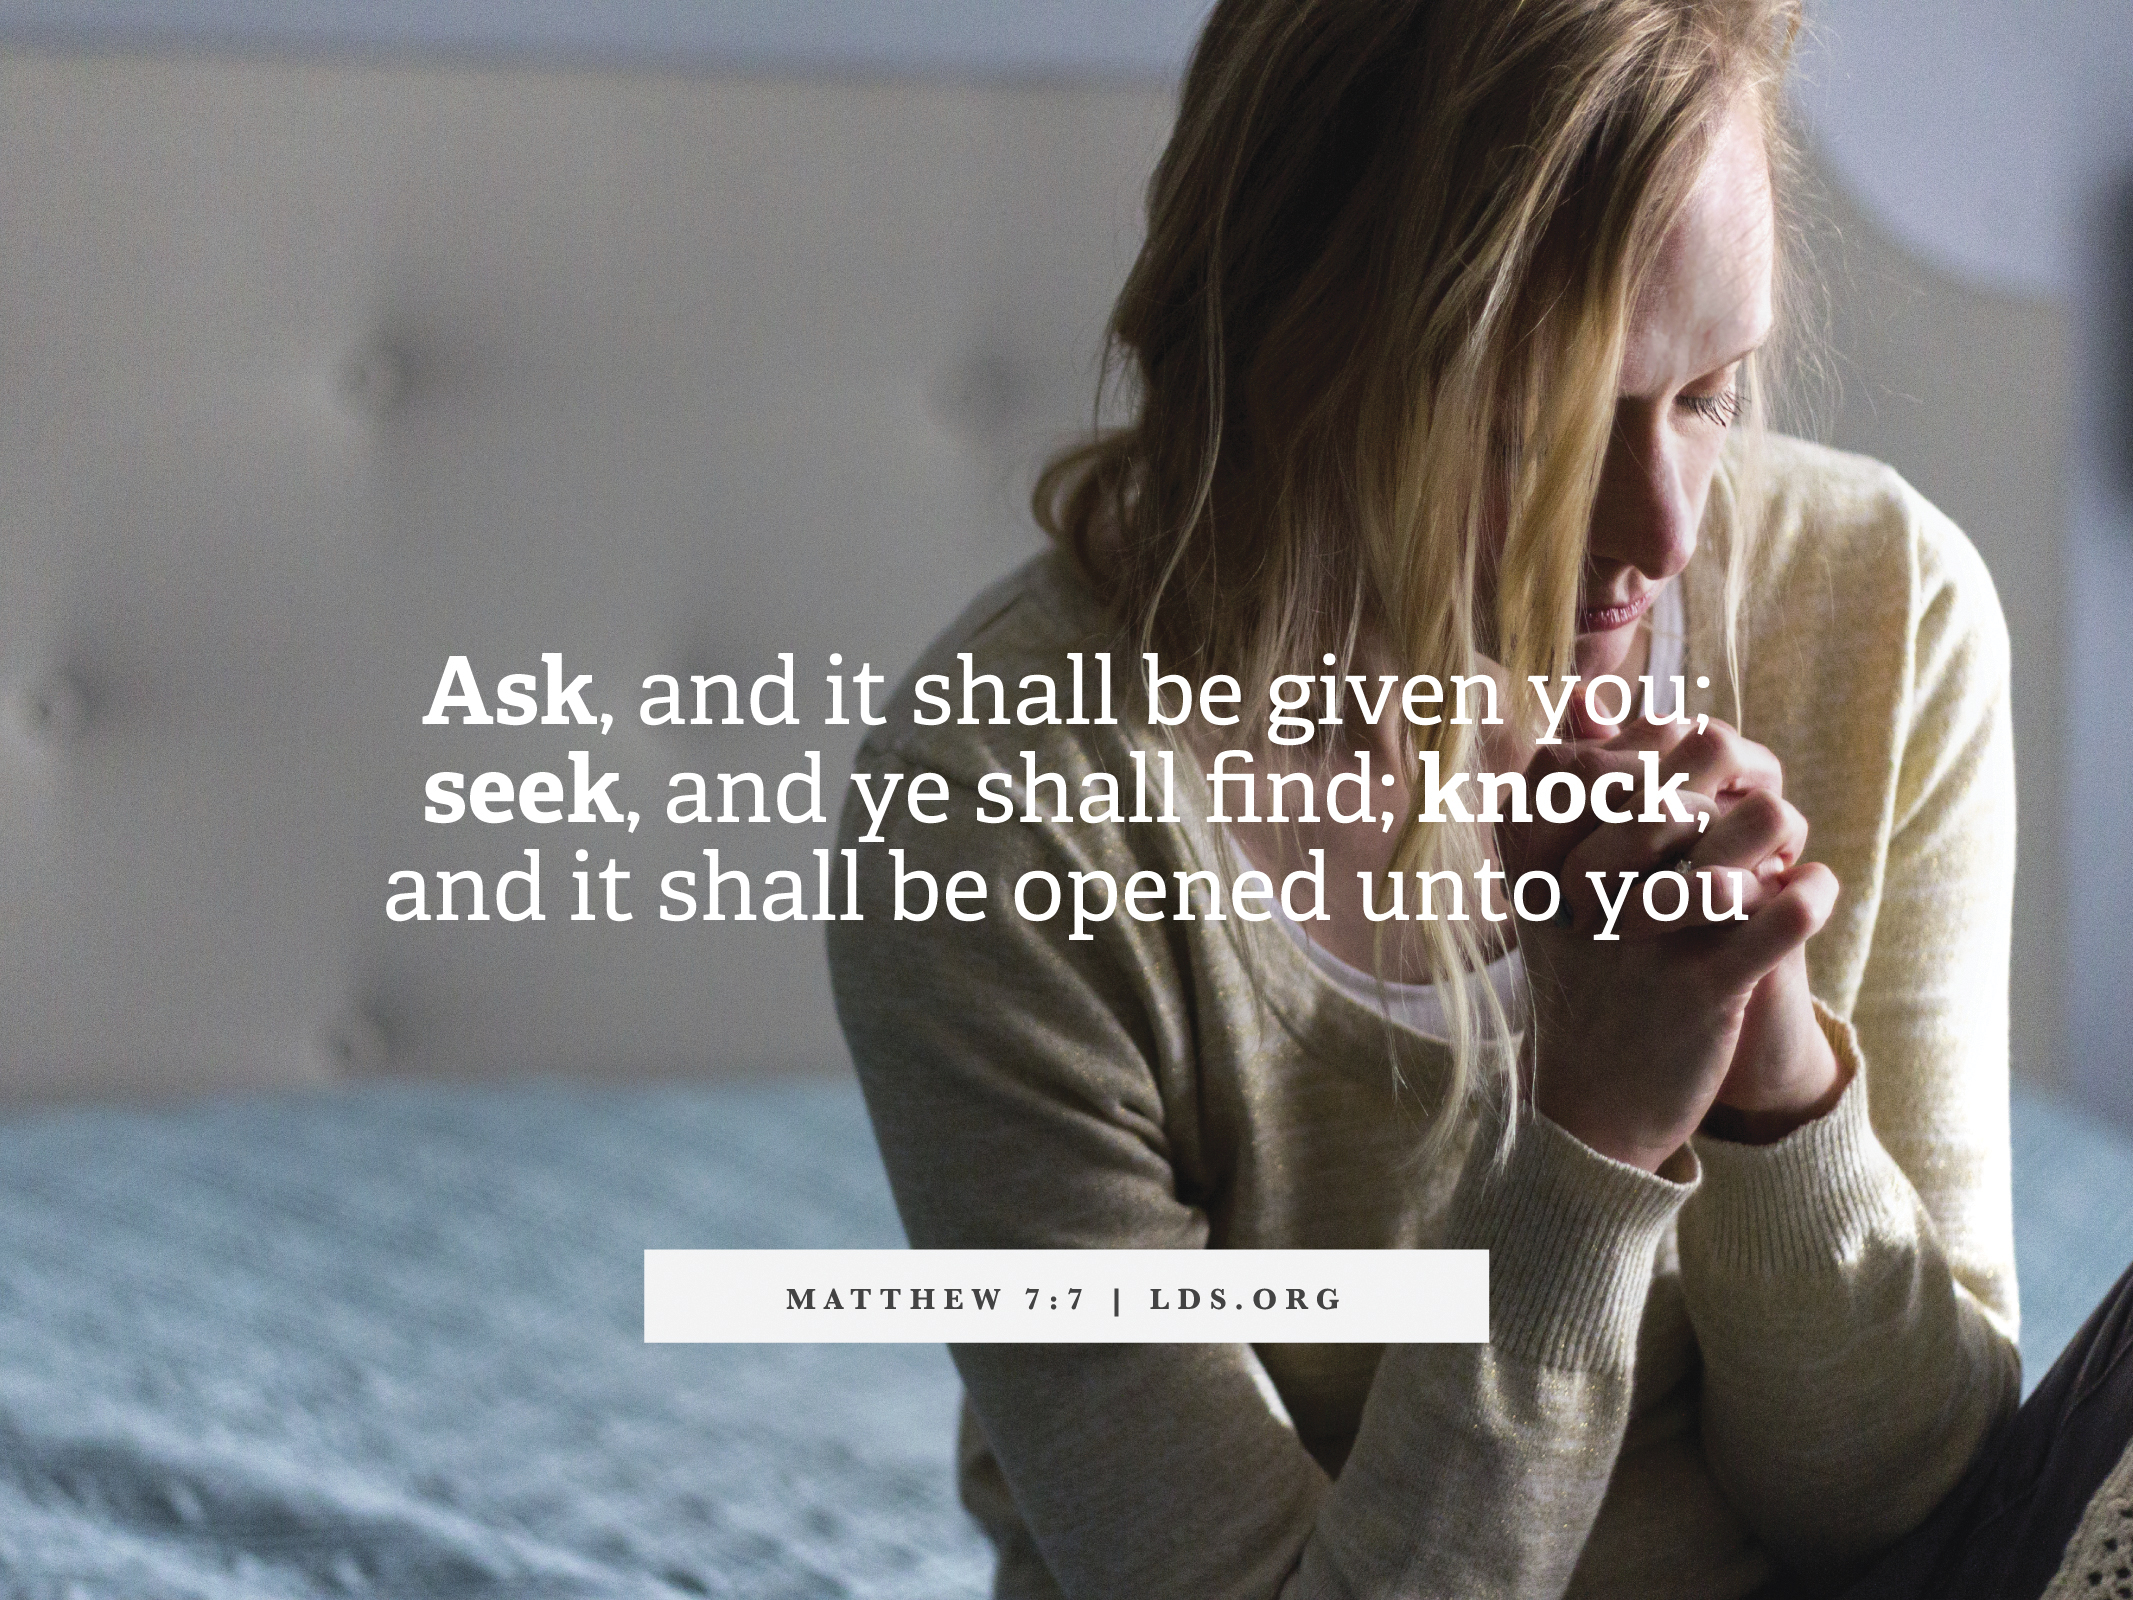 “Ask, and it shall be given you; seek, and ye shall find; knock, and it shall be opened unto you.” —Matthew 7:7